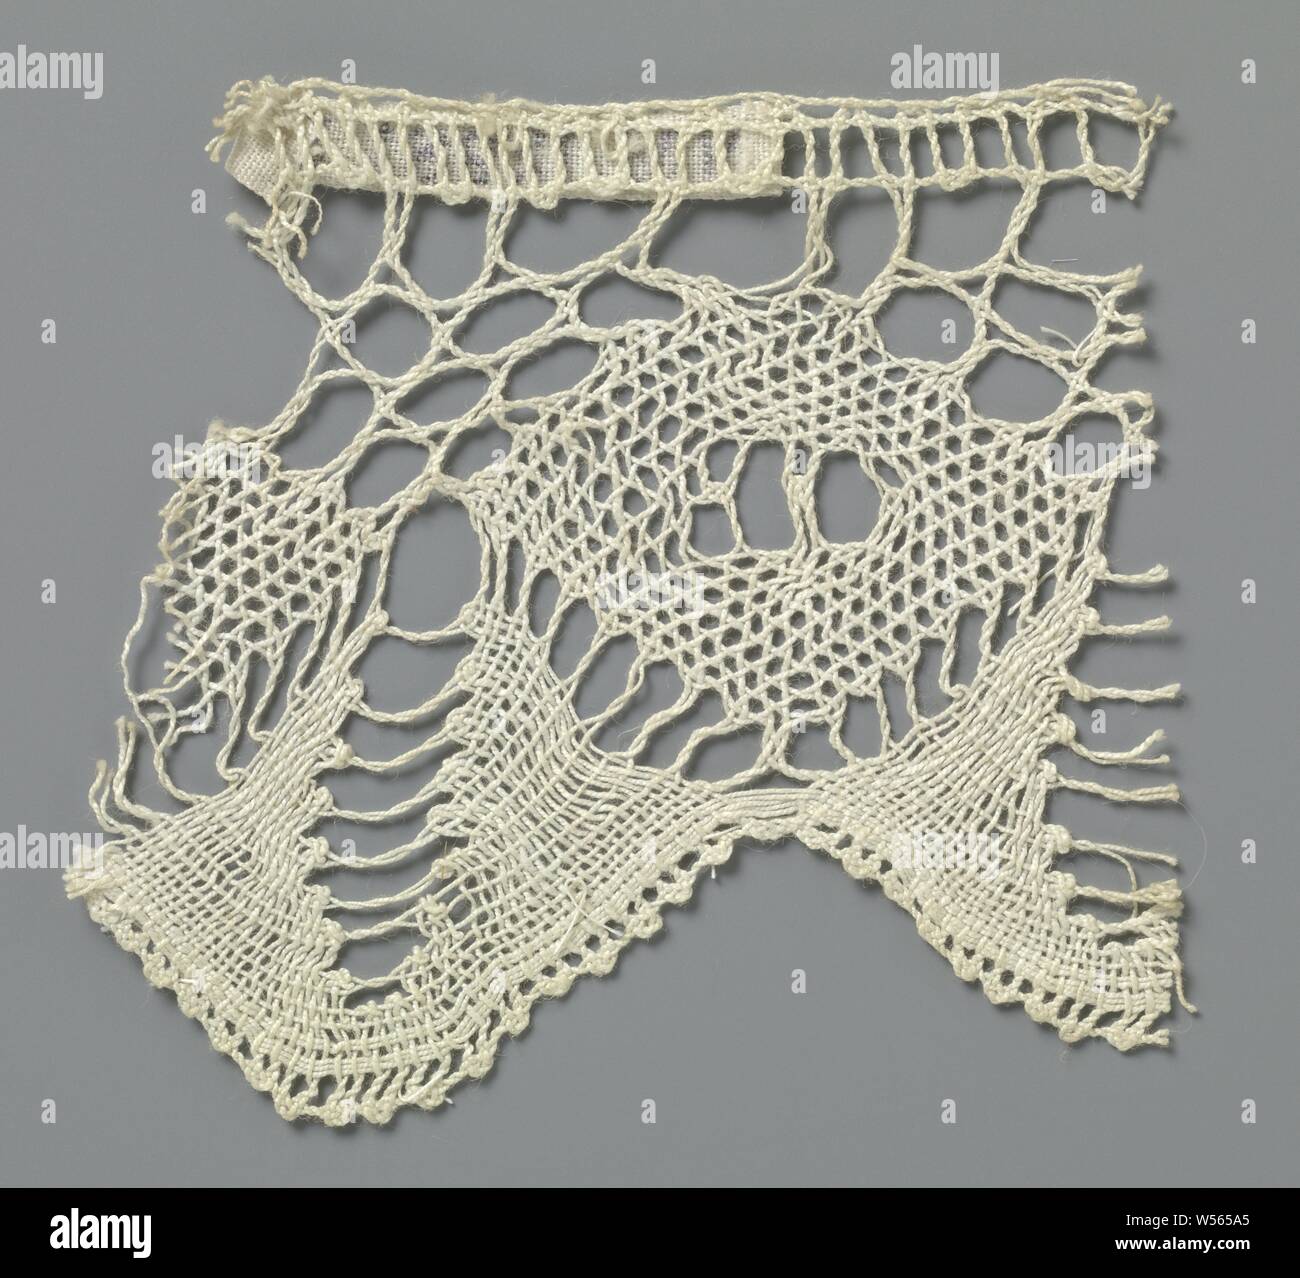 Strip of spool lace with diamond and fan-shaped scallops, Natural spool of lace strip, sling side. The repeating pattern in the center lane consists of a diamond. Between the successive panes there is always a fan-shaped shell hanging downwards, with an open vertical path. The panes are connected to each other at the top by a coarse mesh soil, a Paris soil. The windows are made in net blow and the fans in linen blow. The top of the strip is finished straight. The scallops are finished with picots., anonymous, Brasil, c. 1800 - c. 1899, linen (material), torchon lace, l 7 cm × w 6 cm ×, 4.5 cm Stock Photo